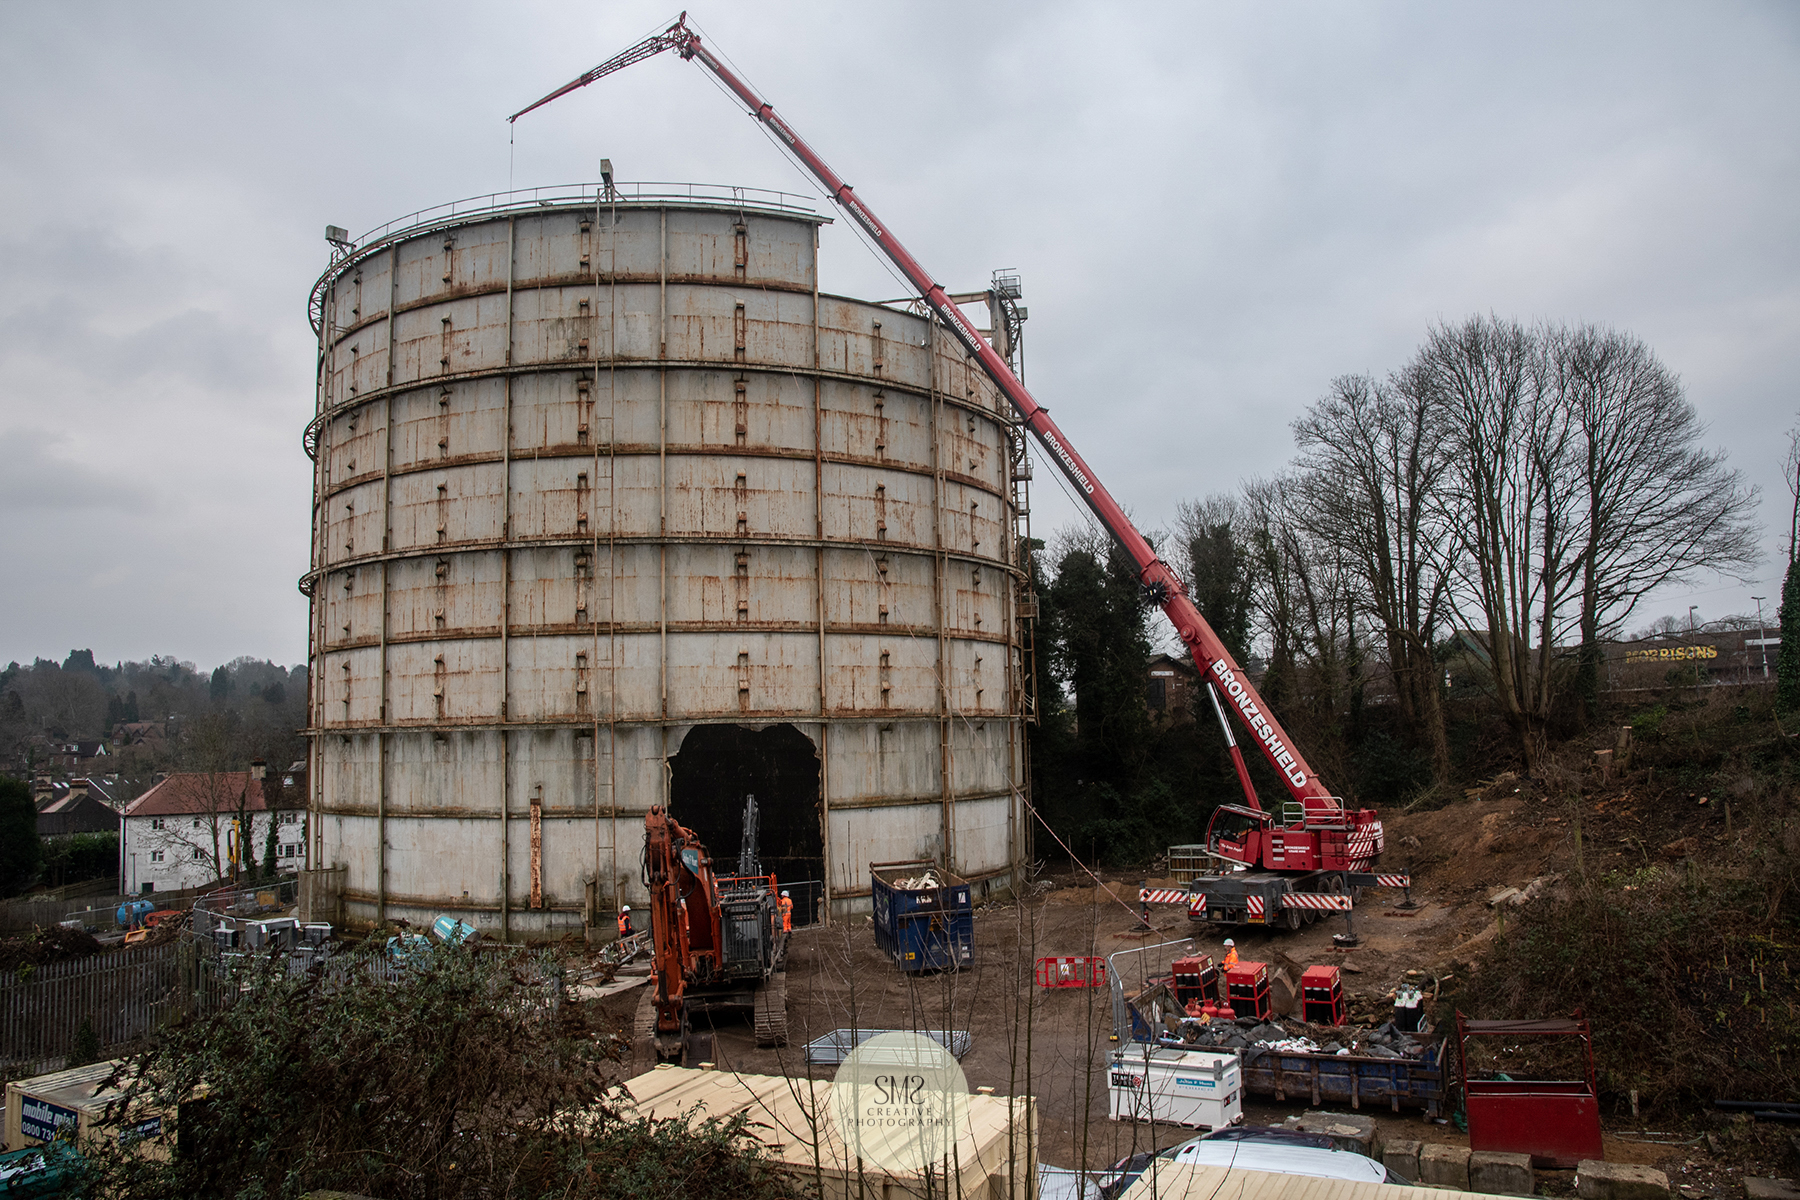 A piece from the side of the gas holder removed so the crane has access to the furthest part of the roof to complete the top removal